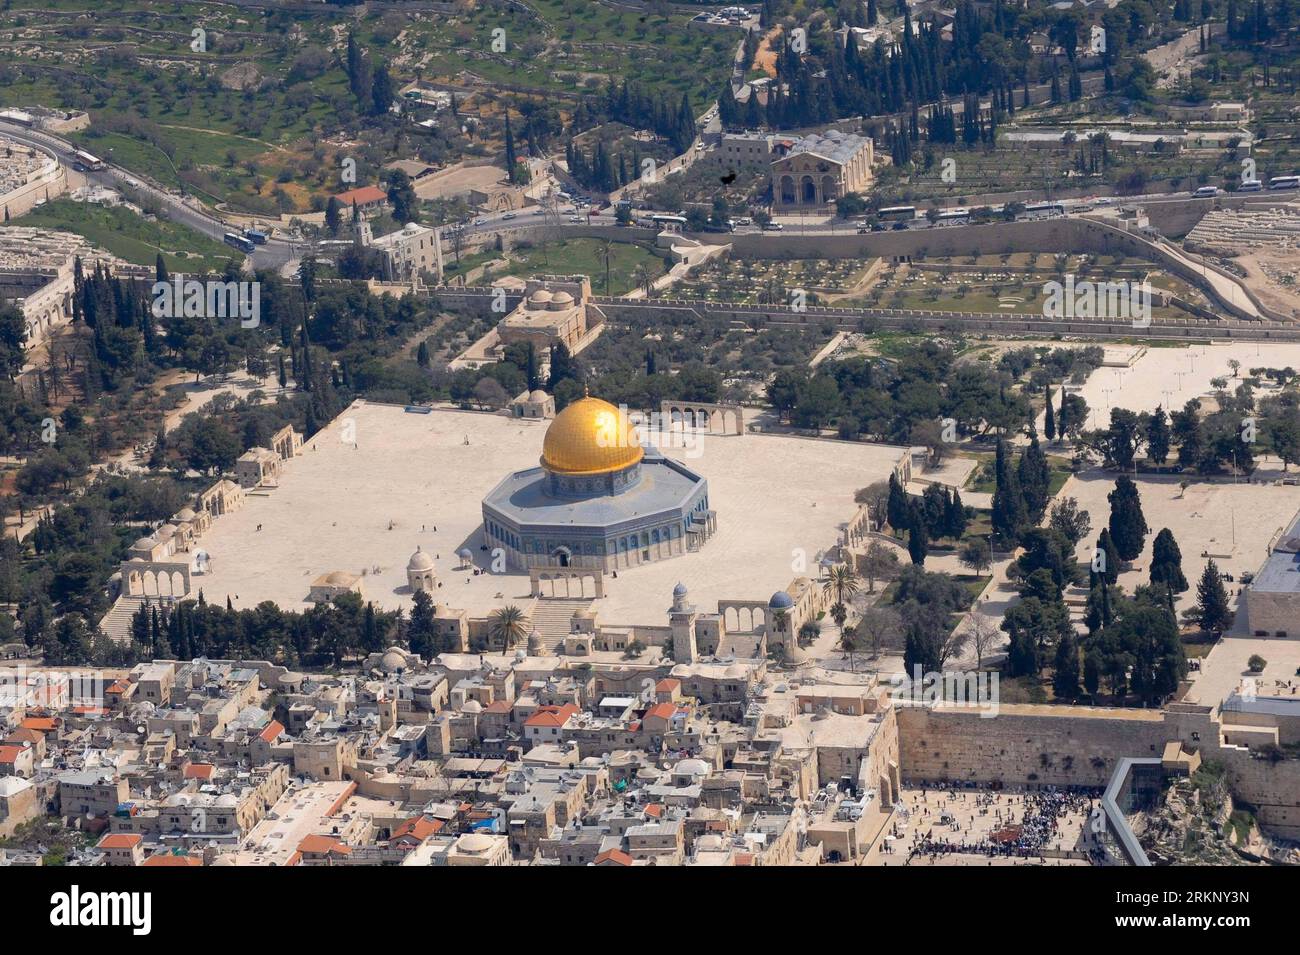 Bildnummer: 57690407  Datum: 27.03.2012  Copyright: imago/Xinhua (120326)-- JERUSALEM, March 26, 2012 (Xinhua) -- Photo taken on March 26, 2012 shows the bird s-eye view of the old city of Jerusalem. Jerusalem is located in the Judean Mountains between the Mediterranean Sea and the northern edge of the Dead Sea. It is a holy city to the three major religions -- Judaism, Christianity and Islam. Today, the status of Jerusalem remains on the core issues in the Israeli-Palestinian conflict. (Xinhua/Yin Dongxun) MIDEAST-JERUSALEM-AERIAL VIEW PUBLICATIONxNOTxINxCHN Gesellschaft Luftaufnahme Totale L Stock Photo